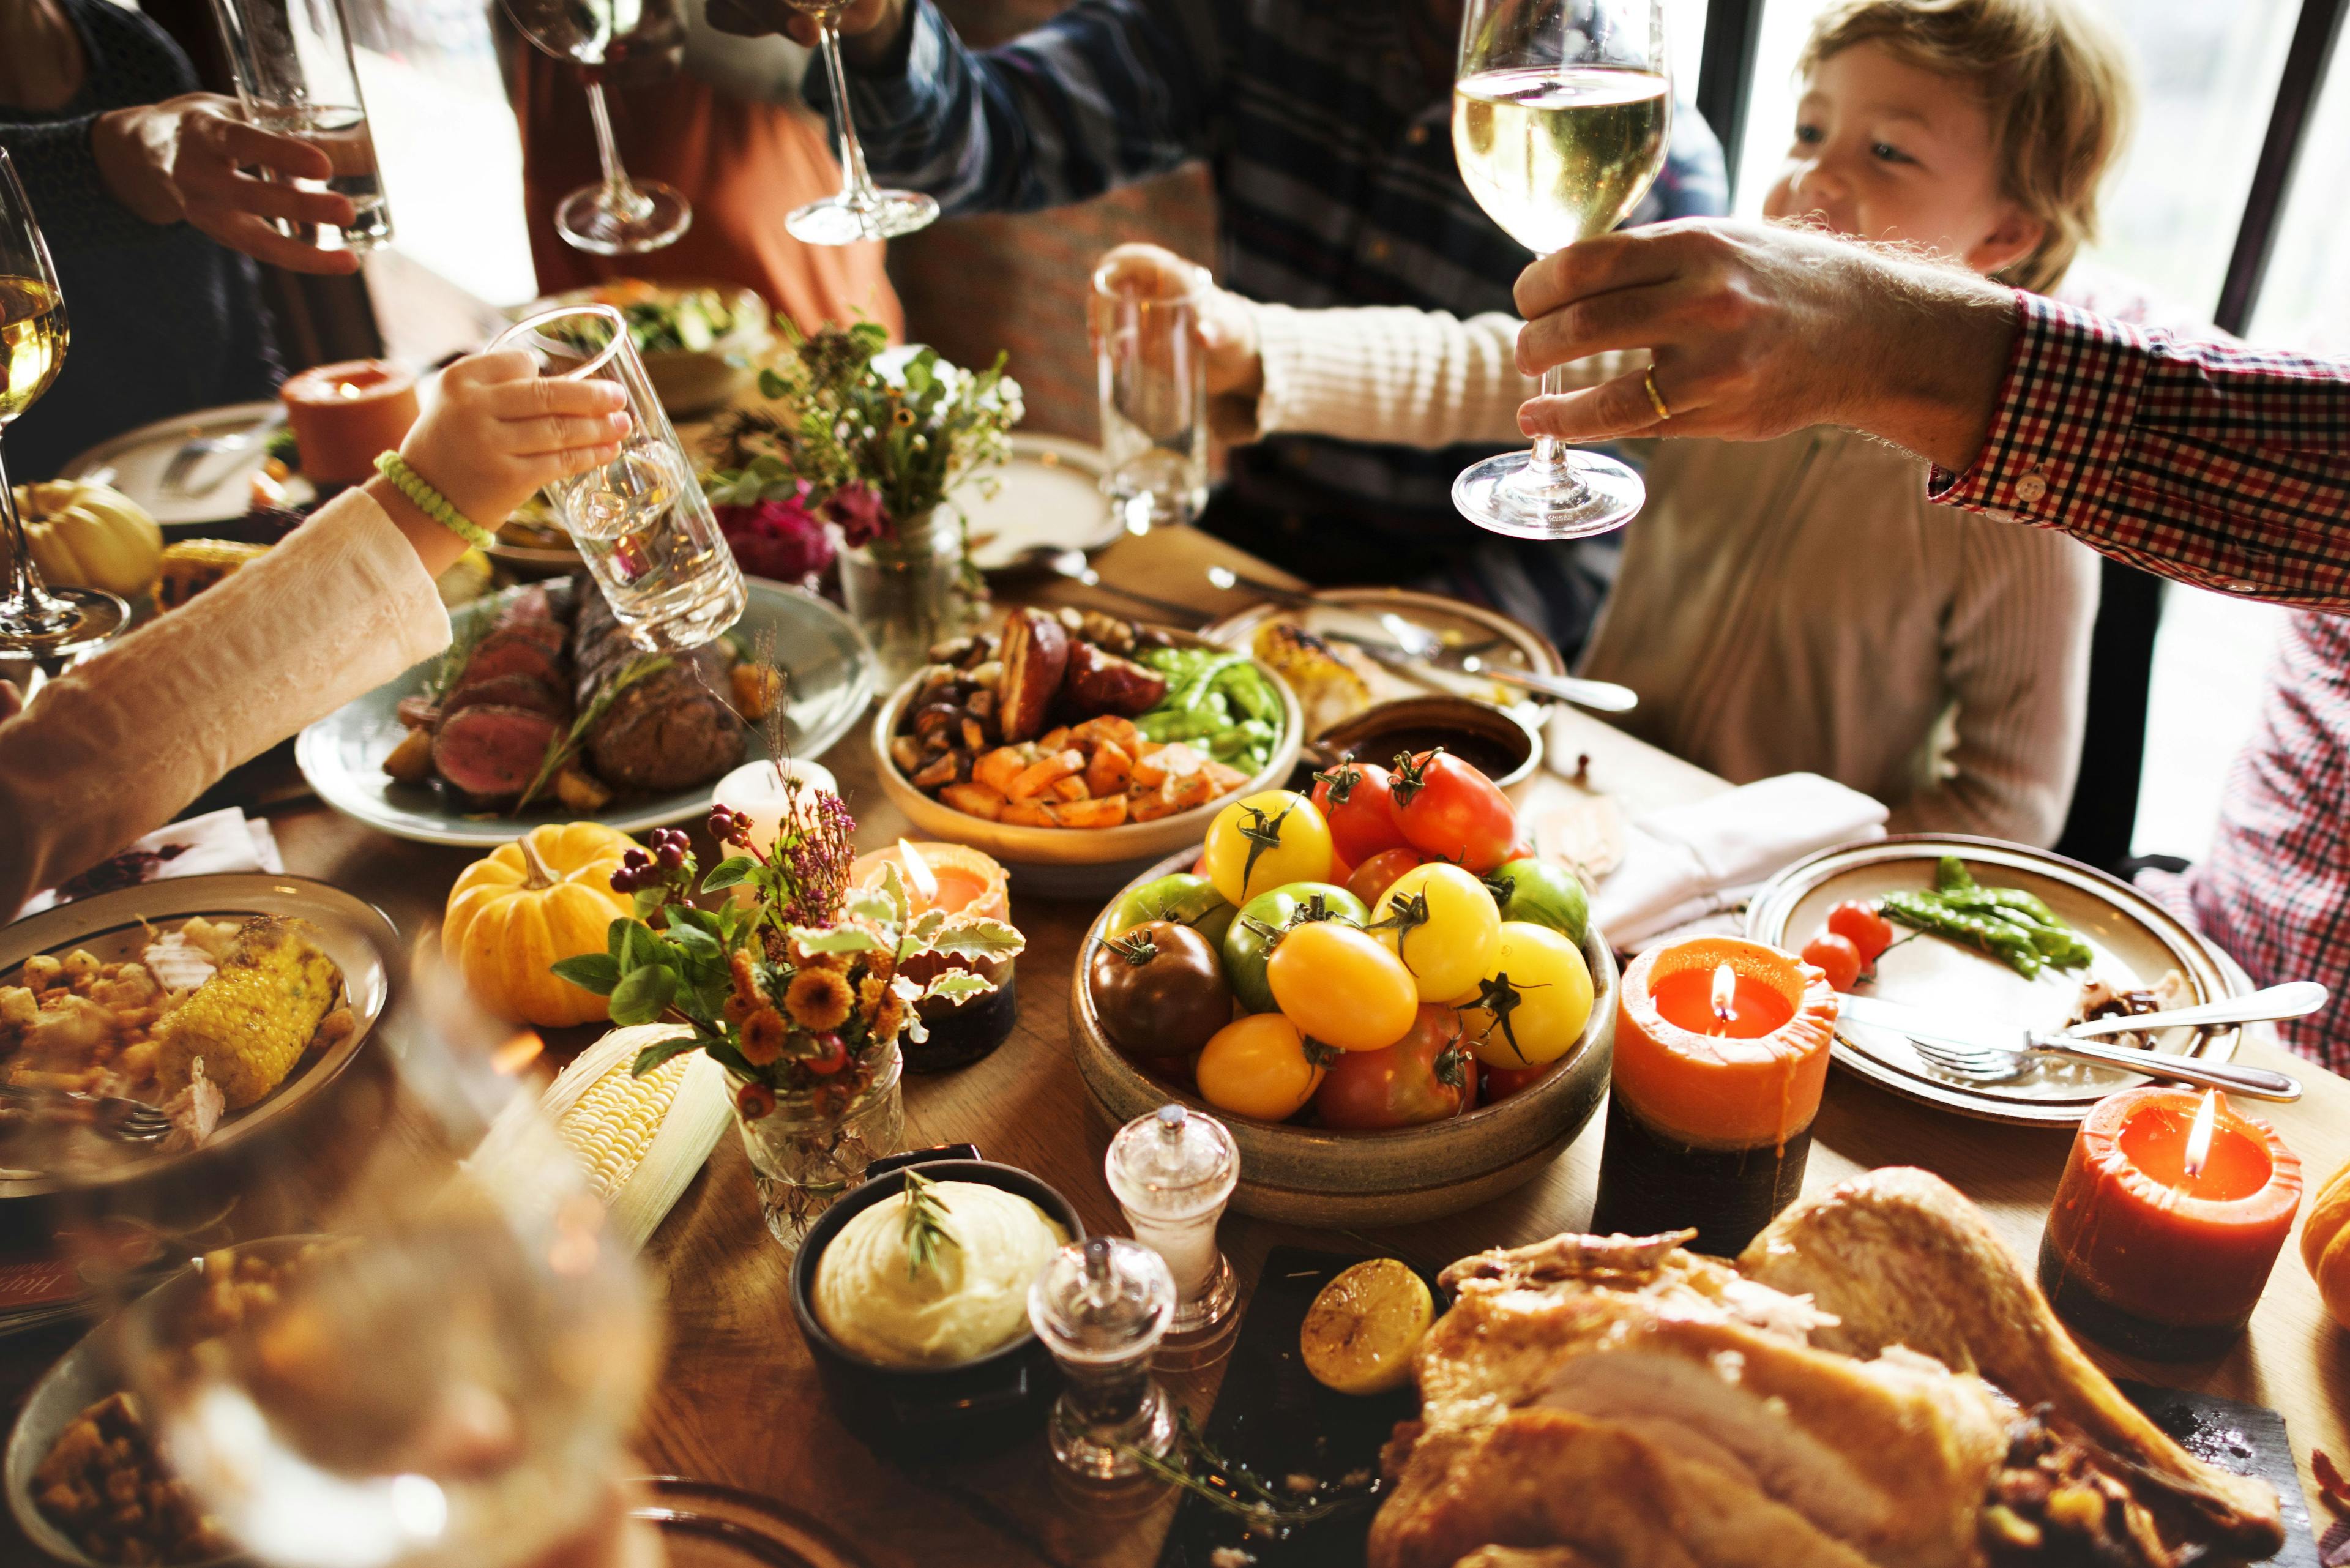 Parents, Clinicians Can Take Steps to Manage Food Allergies During the Holidays